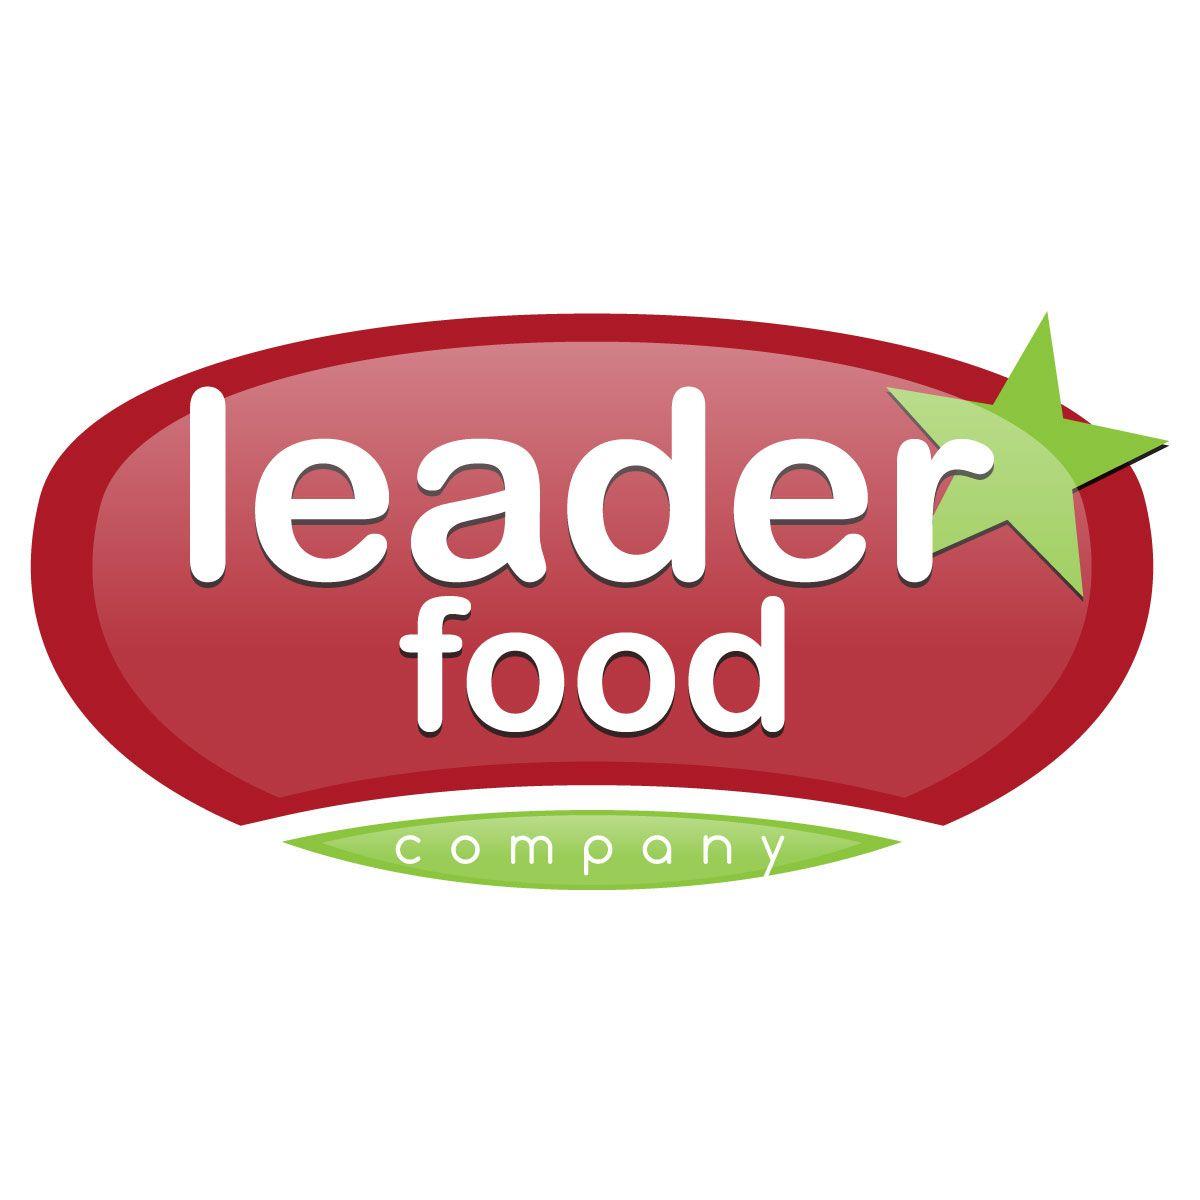 Food with Red Oval Logo - Fiche entreprise: LEADER FOOD COMPANY - Keejob